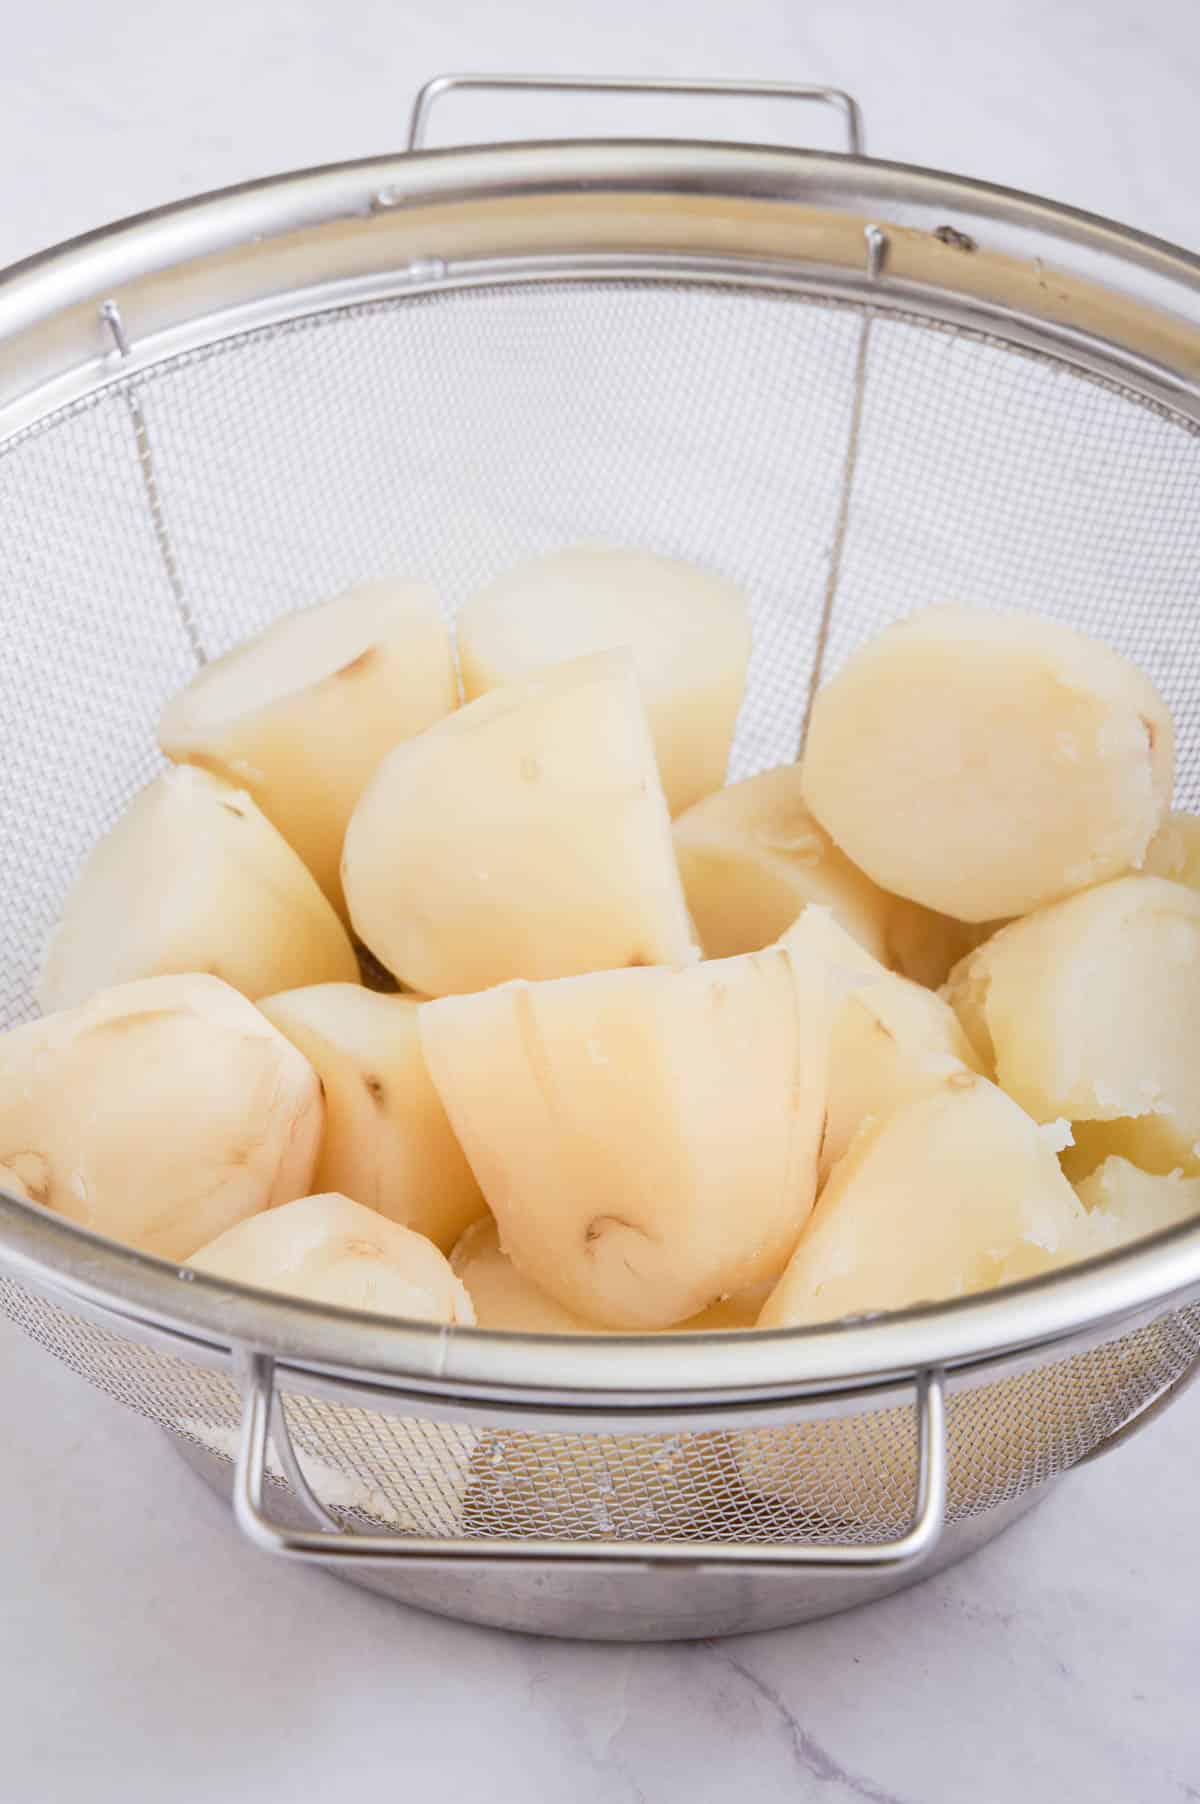 Cooked potatoes are drained in a colander.